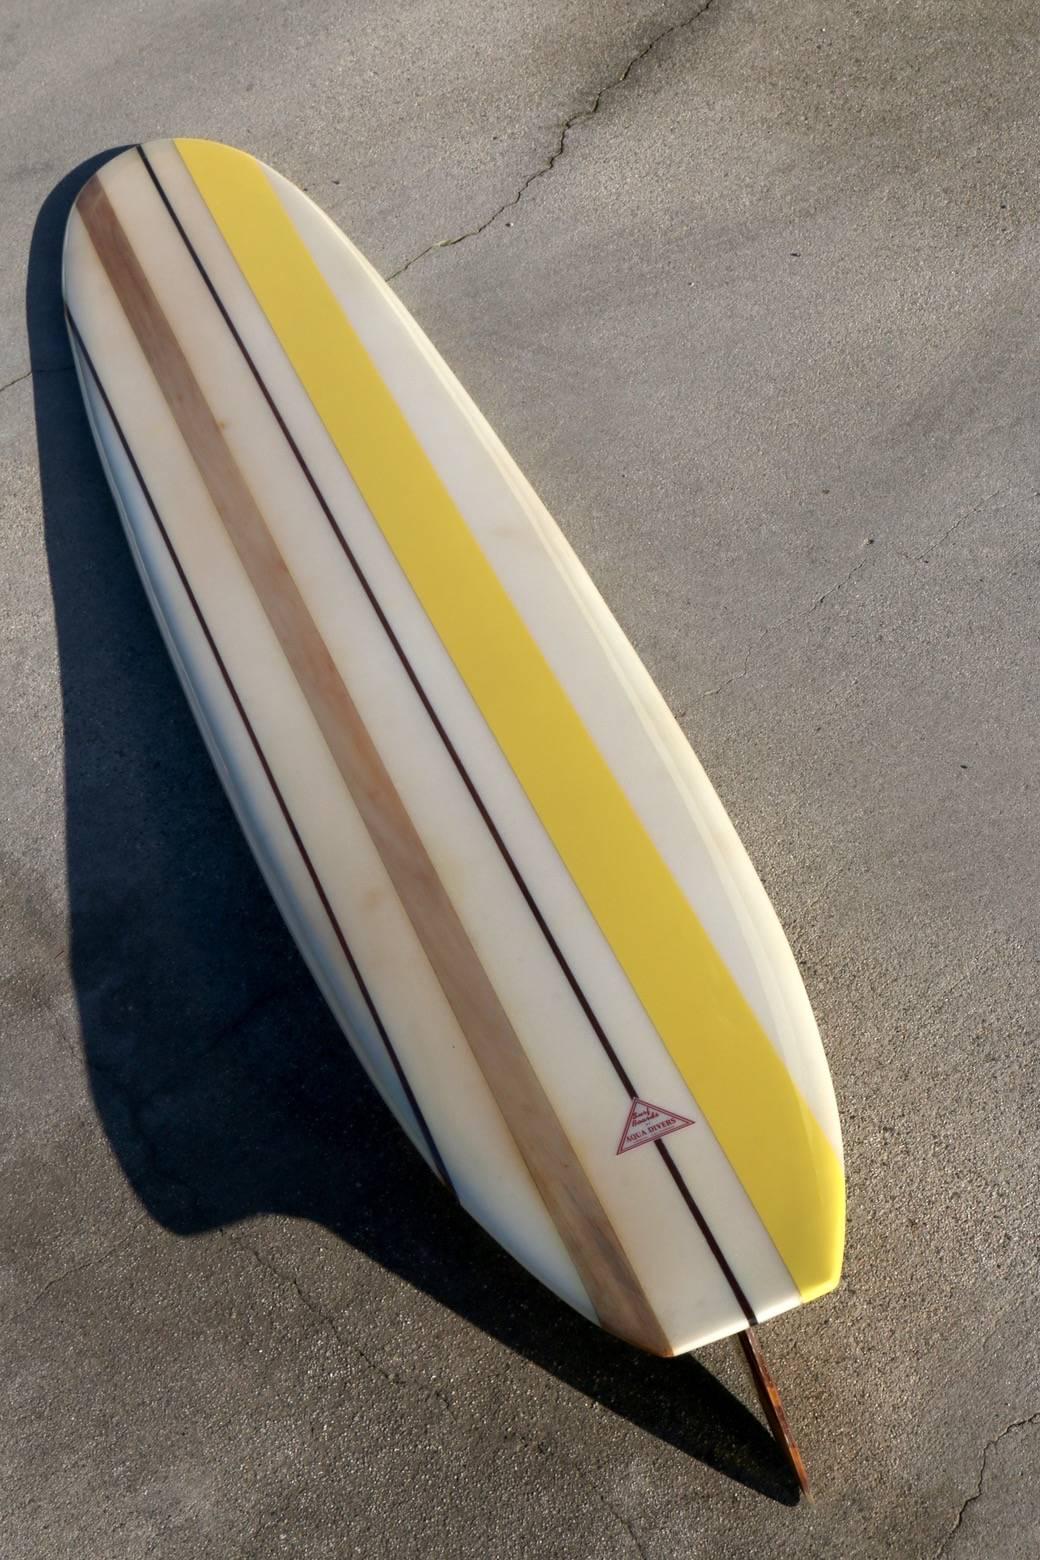 Fully restored early 1960s Surfboard by Aqua Divers, Lomita CA, Extremely Rare. At 9 foot, 6 inches long this early 1960s, creamy white longboard with wonderful accents offers a majestic presence. It's striking to view from all angles and looks